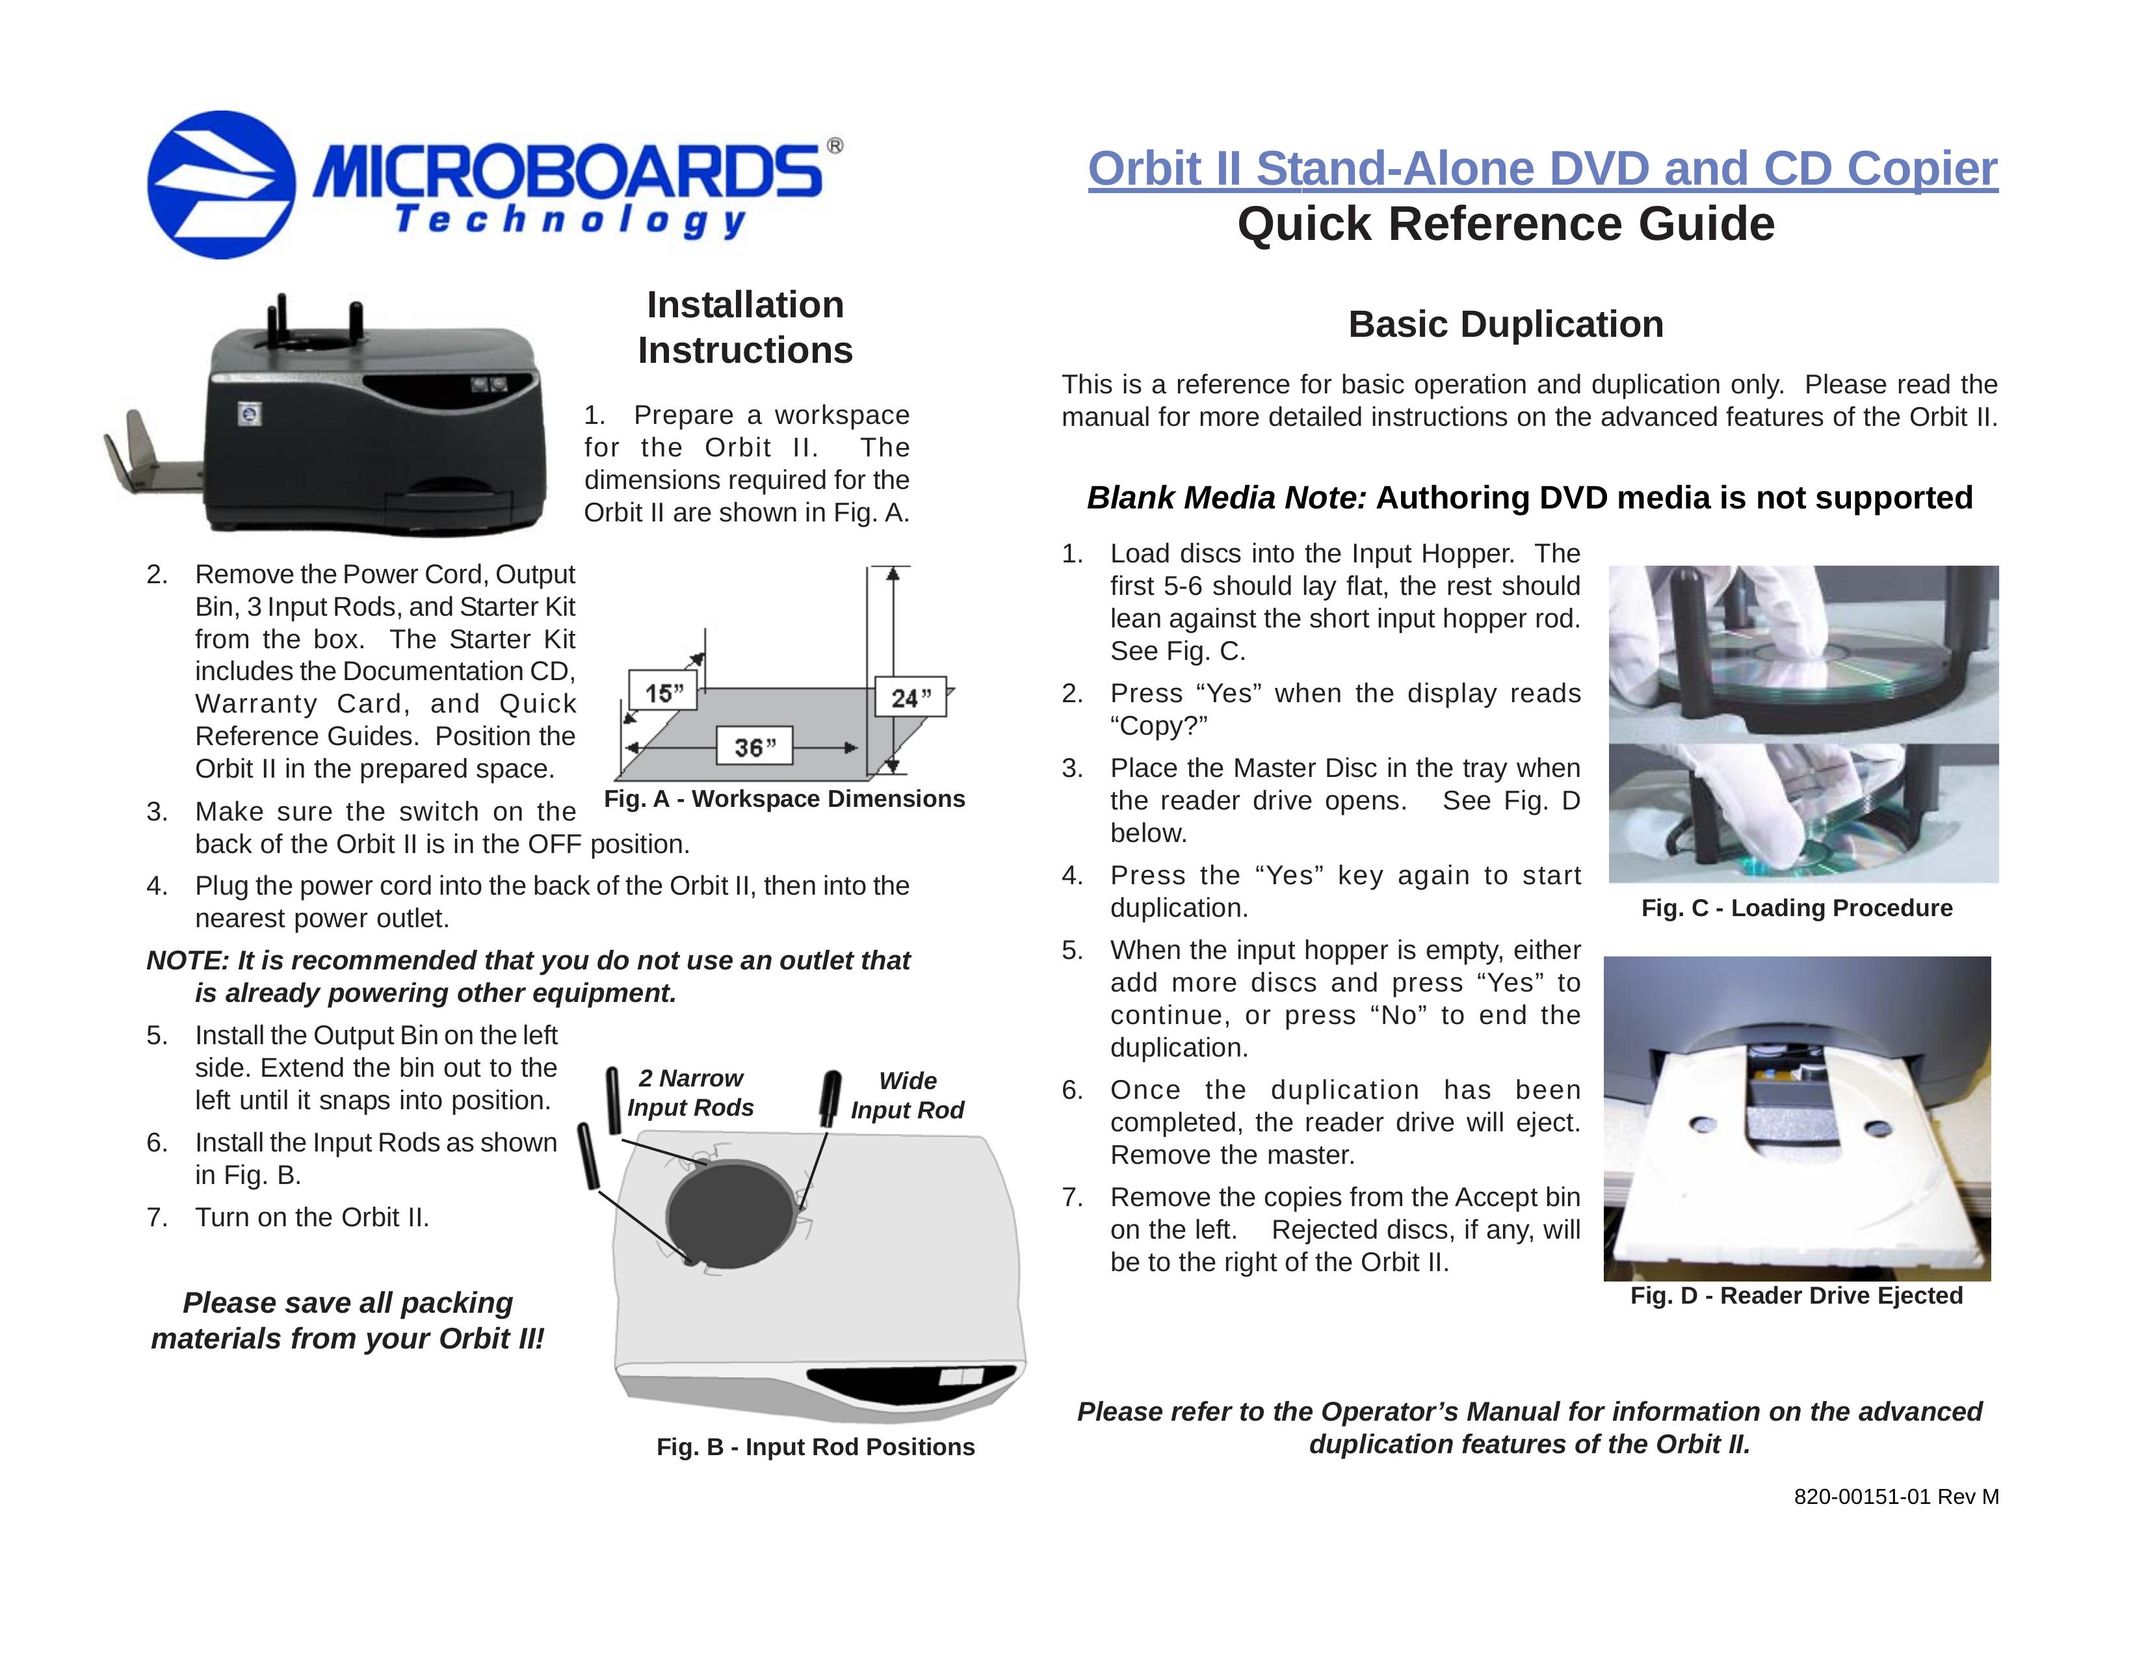 MicroBoards Technology 820-00151-01 DVD Recorder User Manual